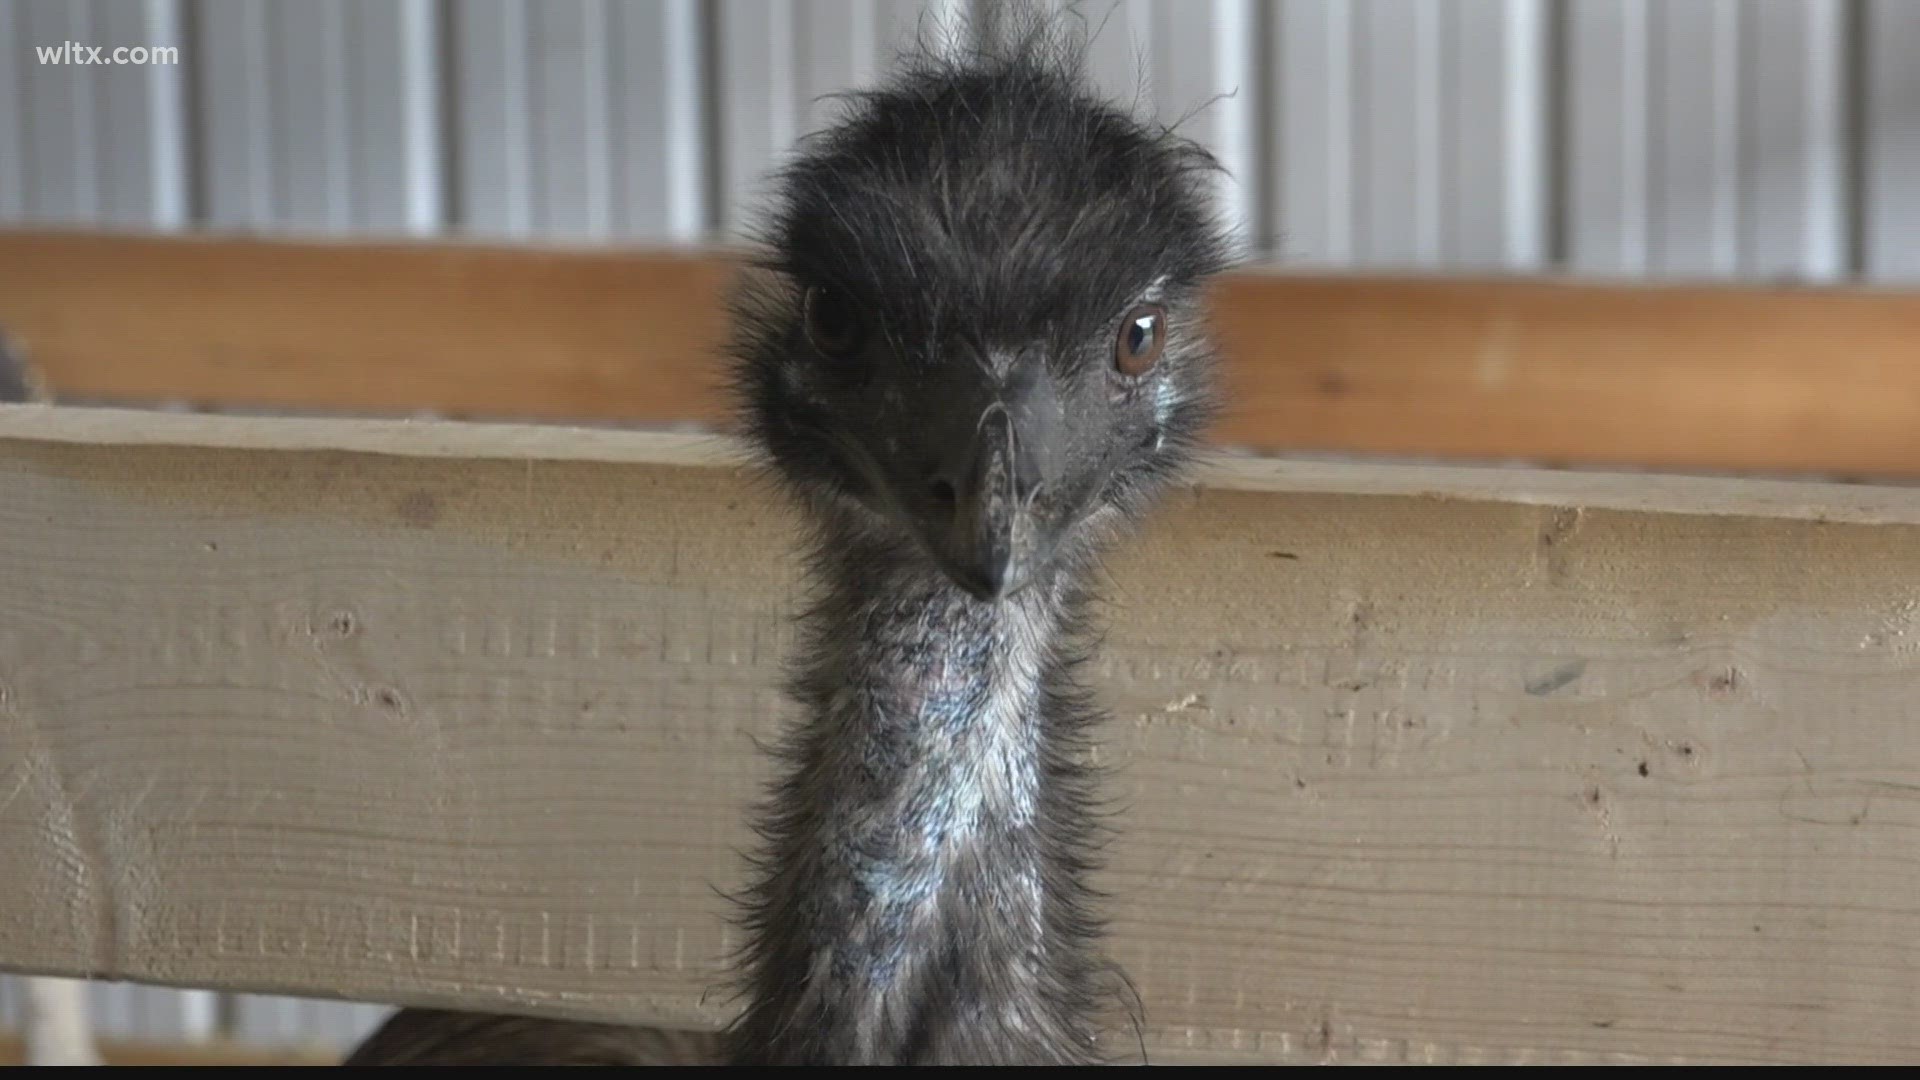 After five days of searching and knocking on neighbors' doors, Barbara Kennedy found her lost emu.